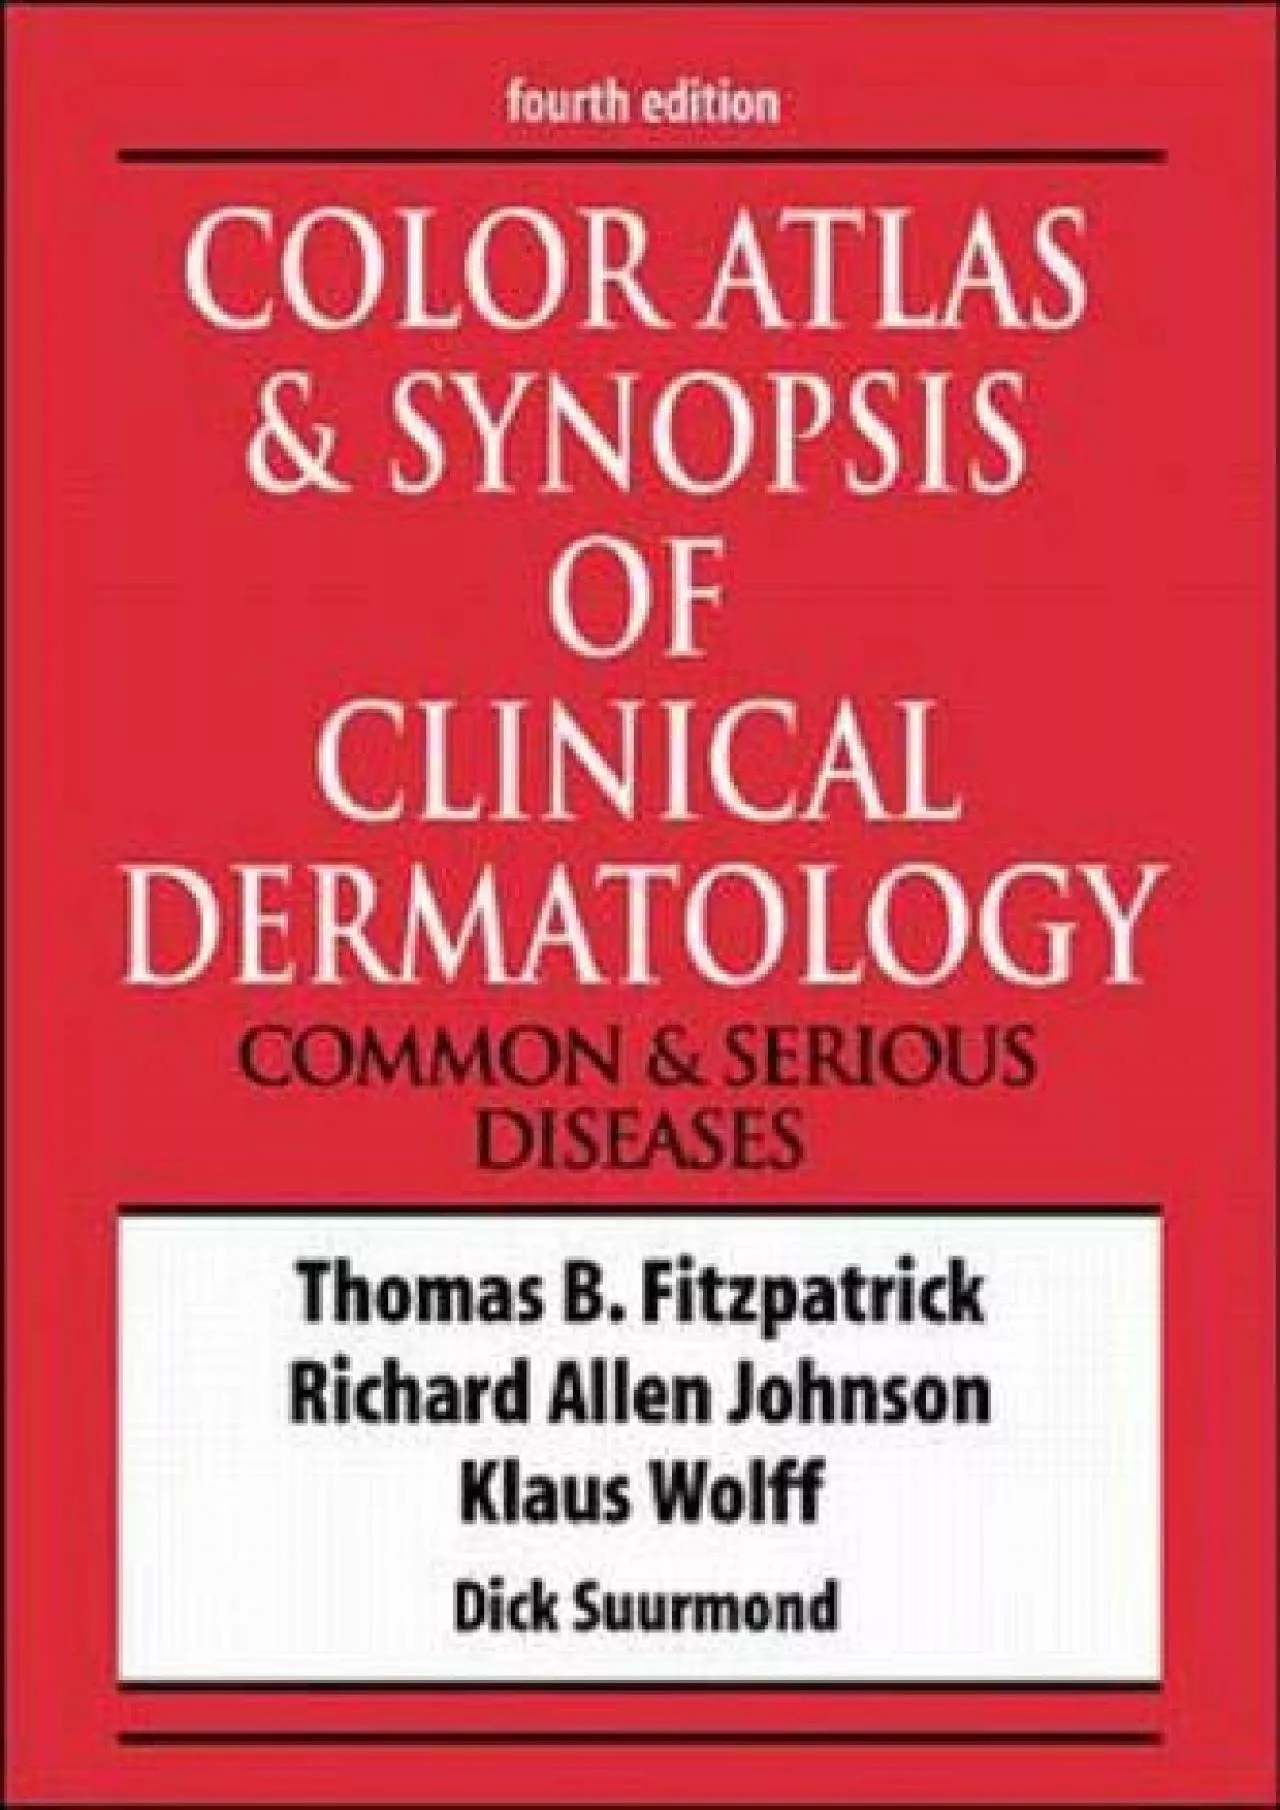 (DOWNLOAD)-Color Atlas & Synopsis of Clinical Dermatology